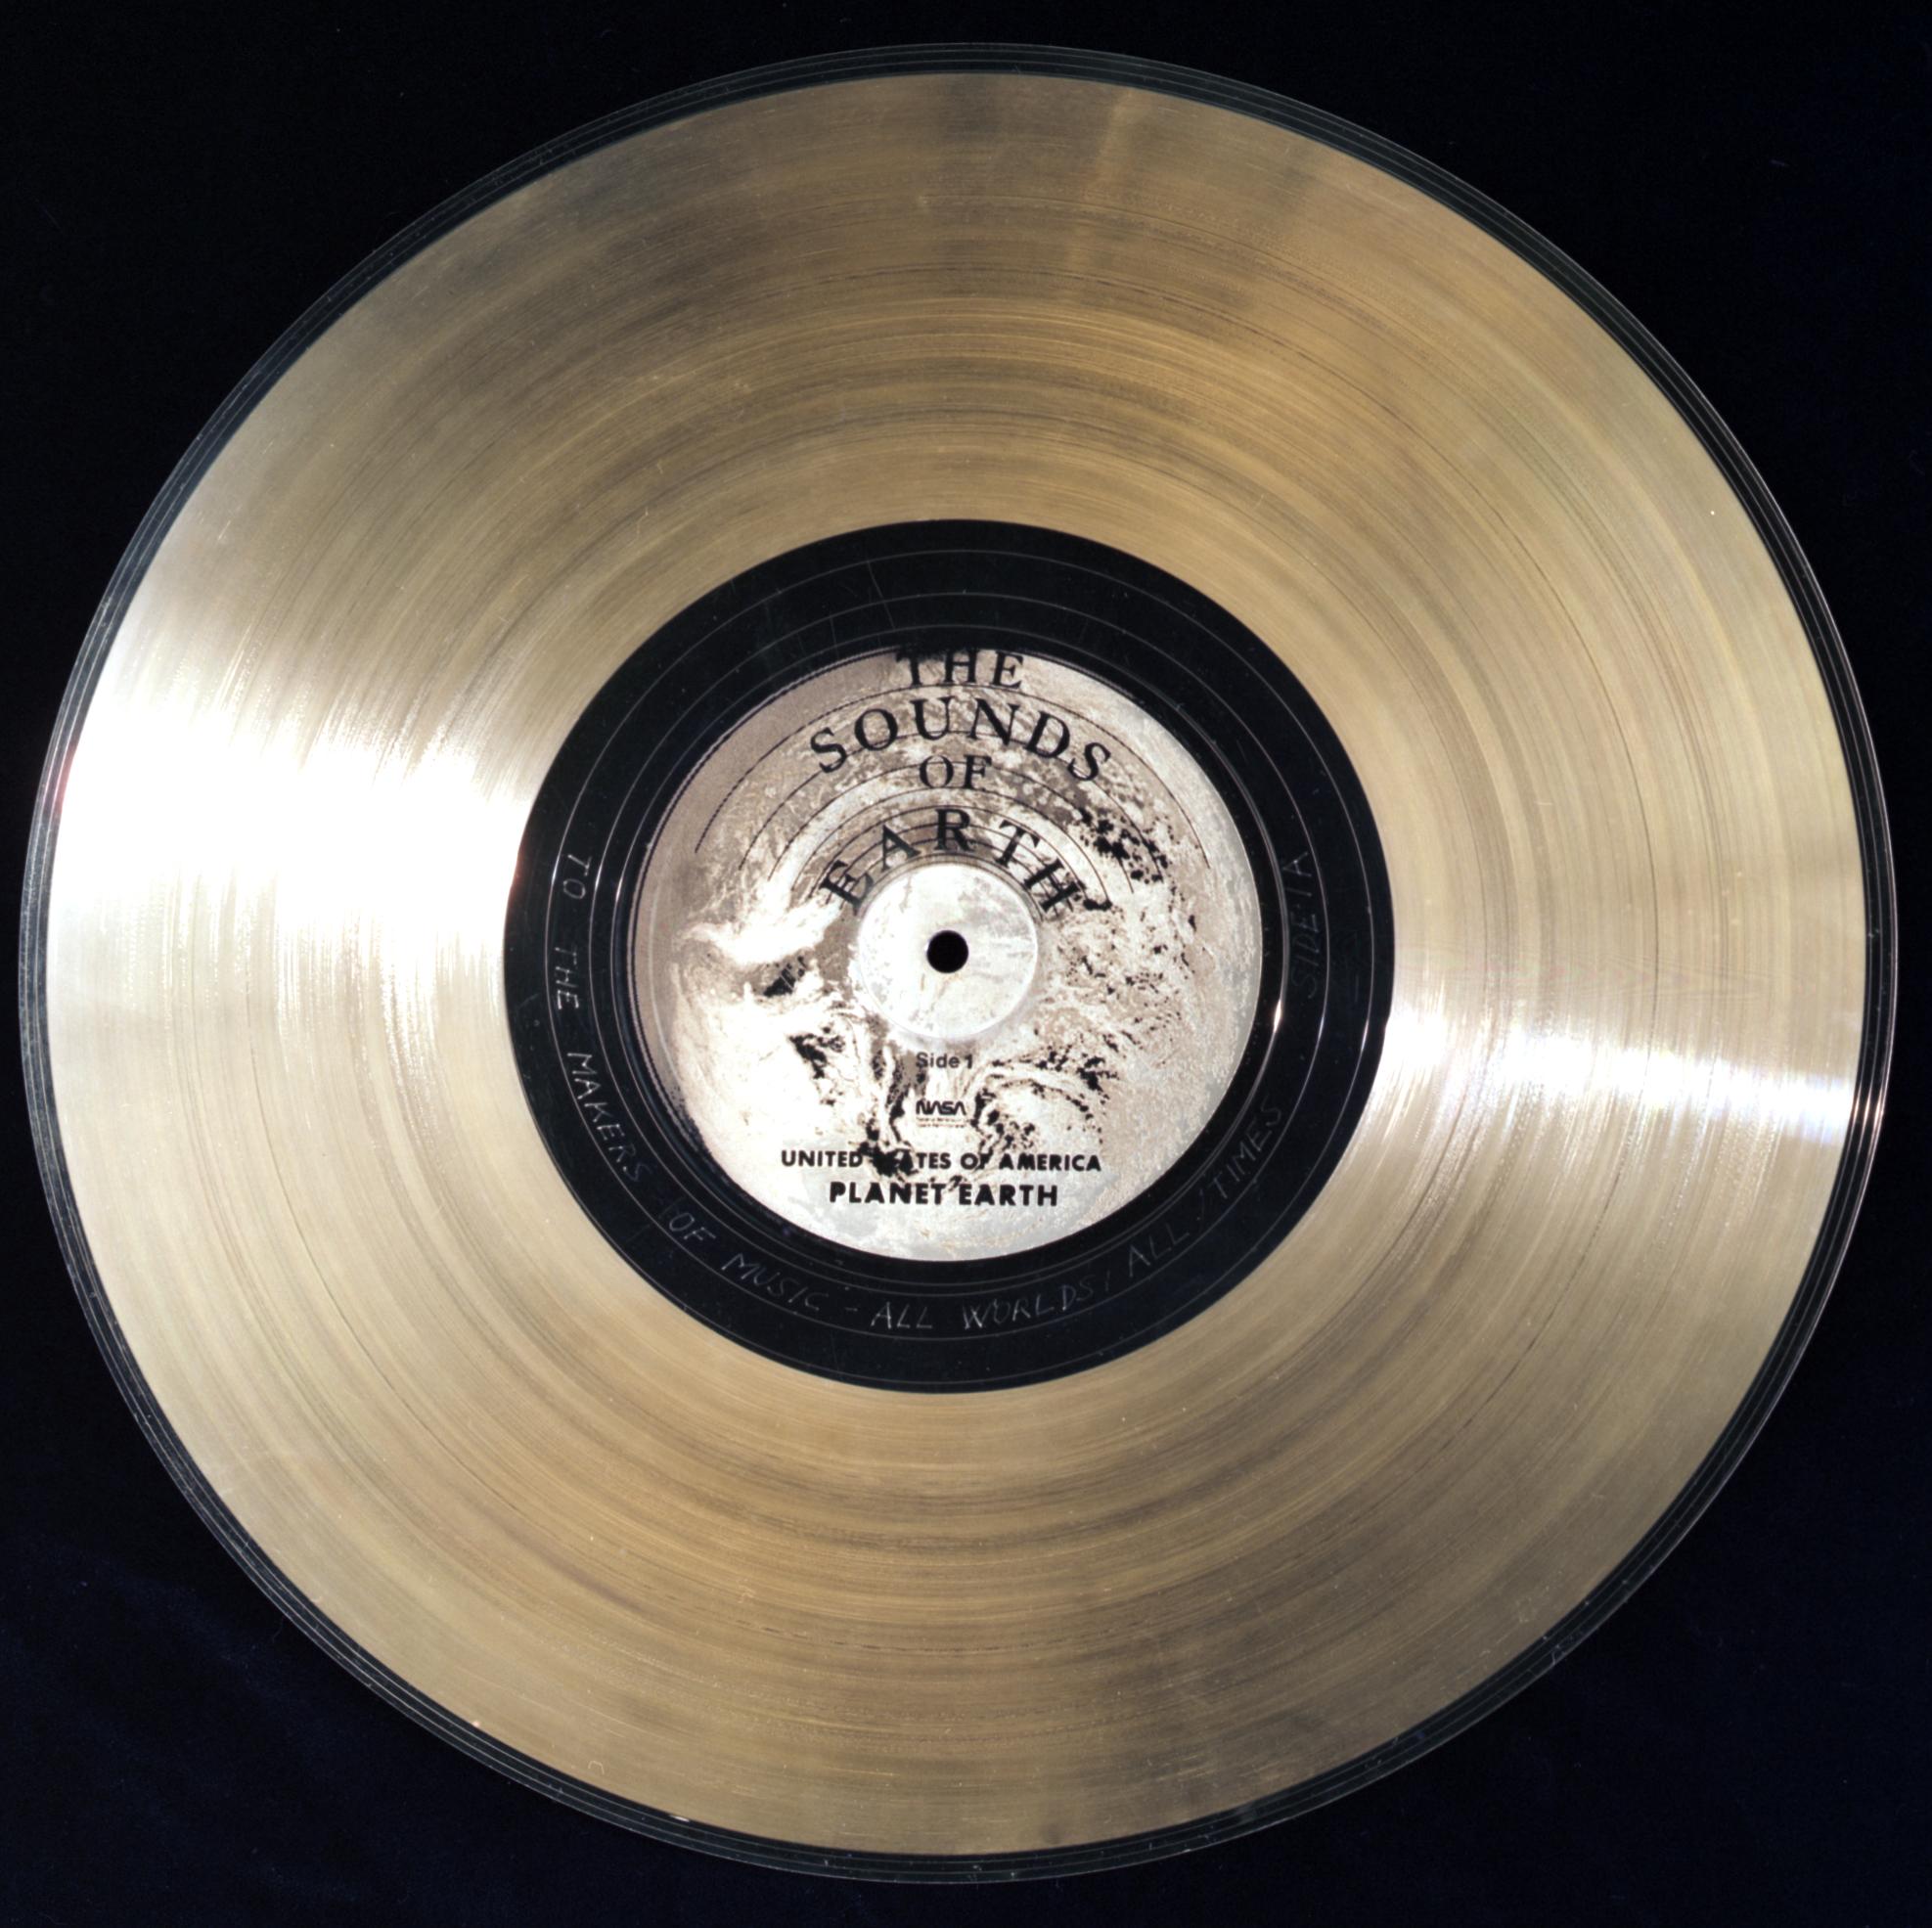 A golden record says The Sounds of Earth on the label and to the makers of music - all worlds, all time hand etched into the margin at the center.